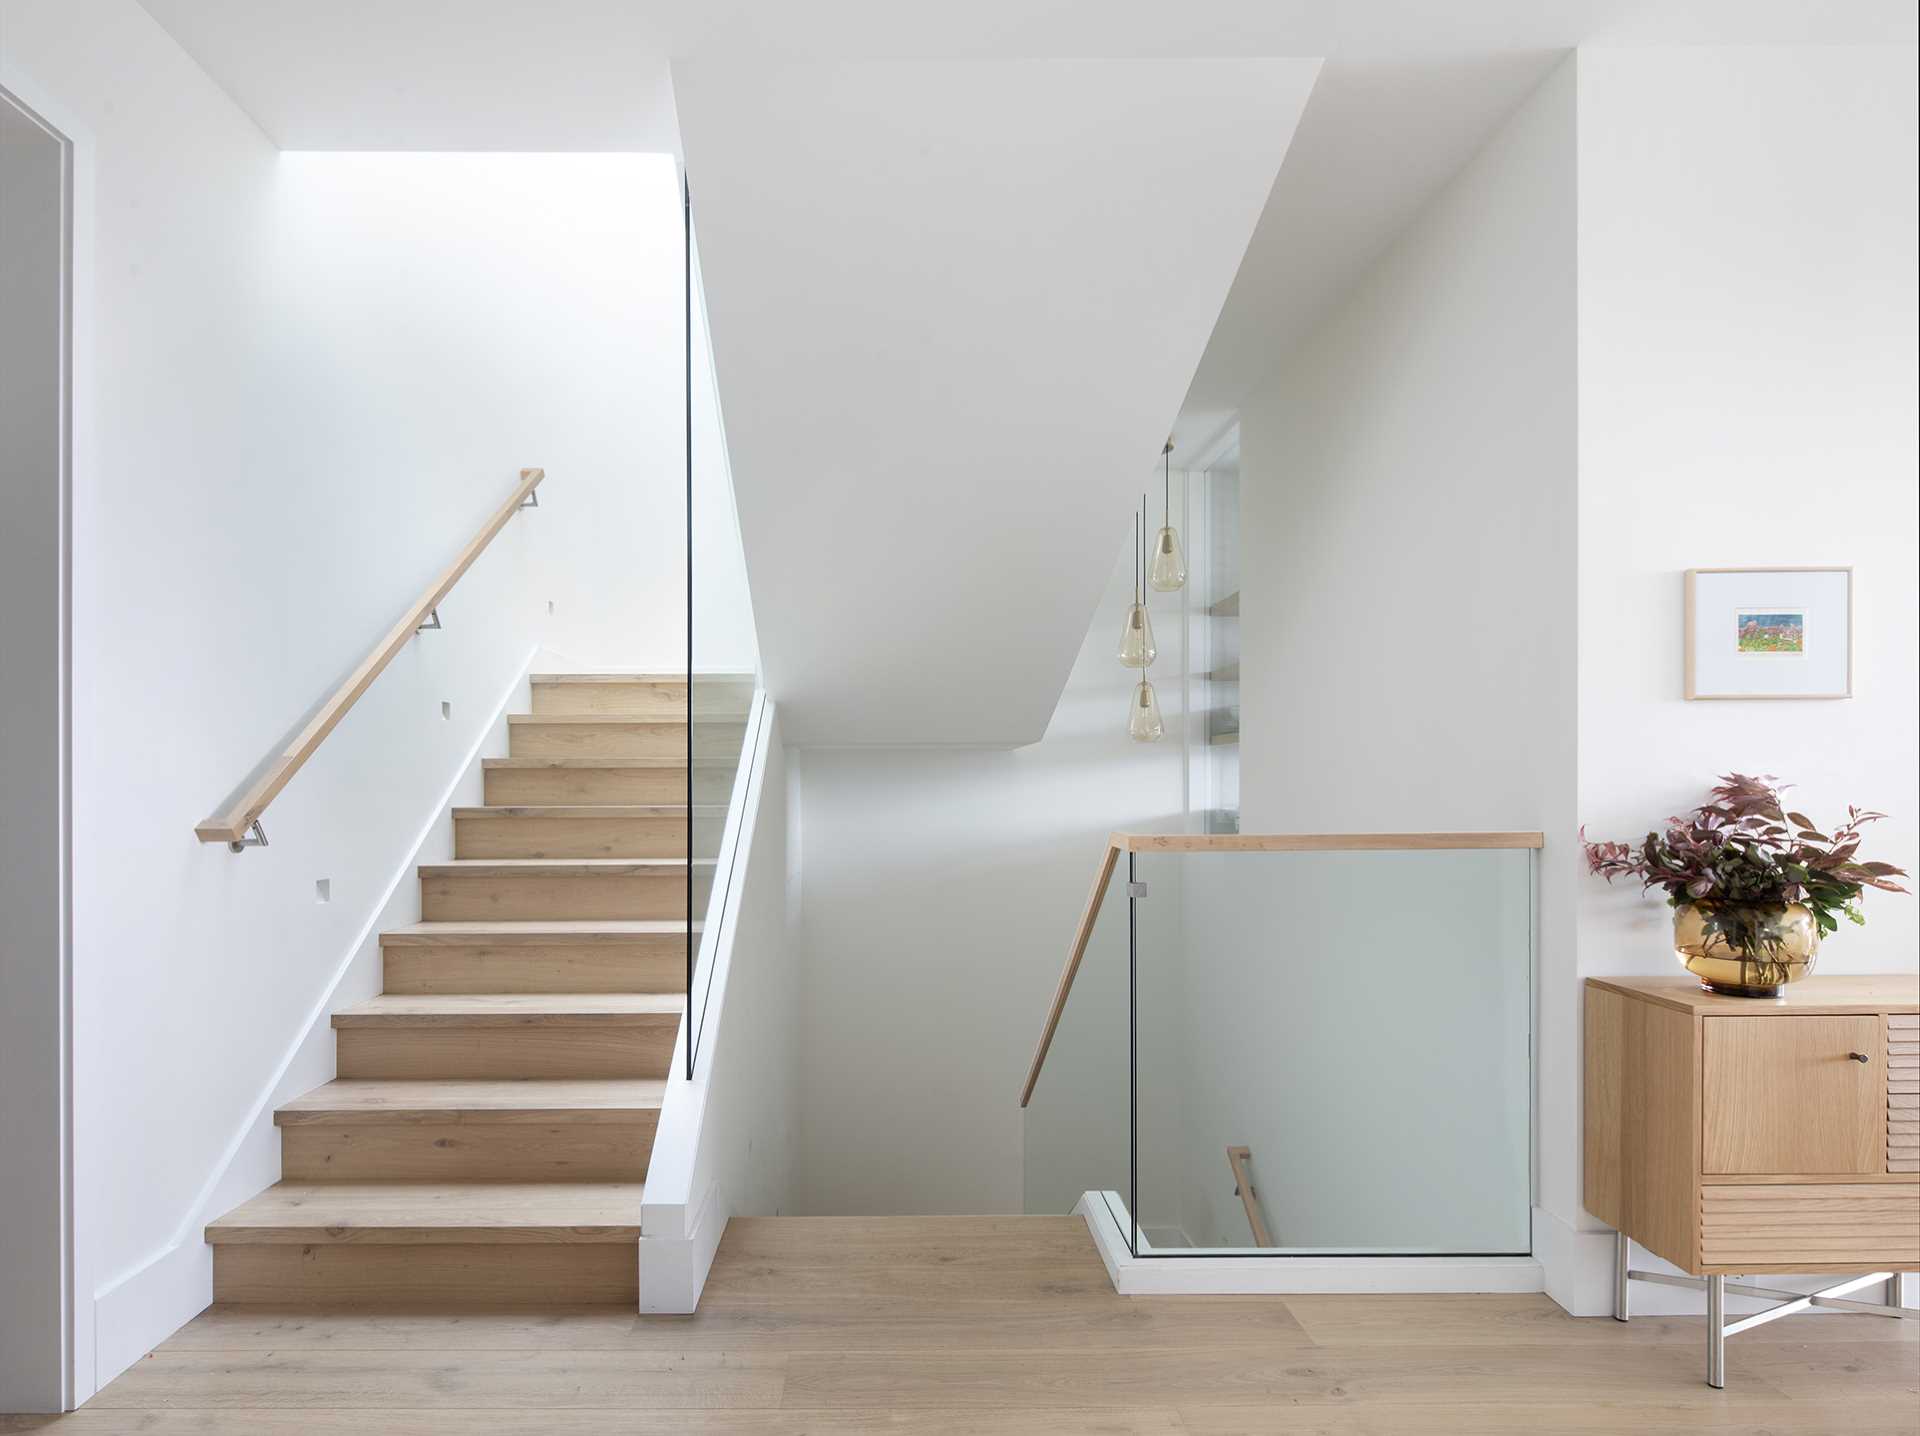 The stairwell connects all of the different levels of the home and features wood treads, while the glass railings allow natural light to travel throughout the space.